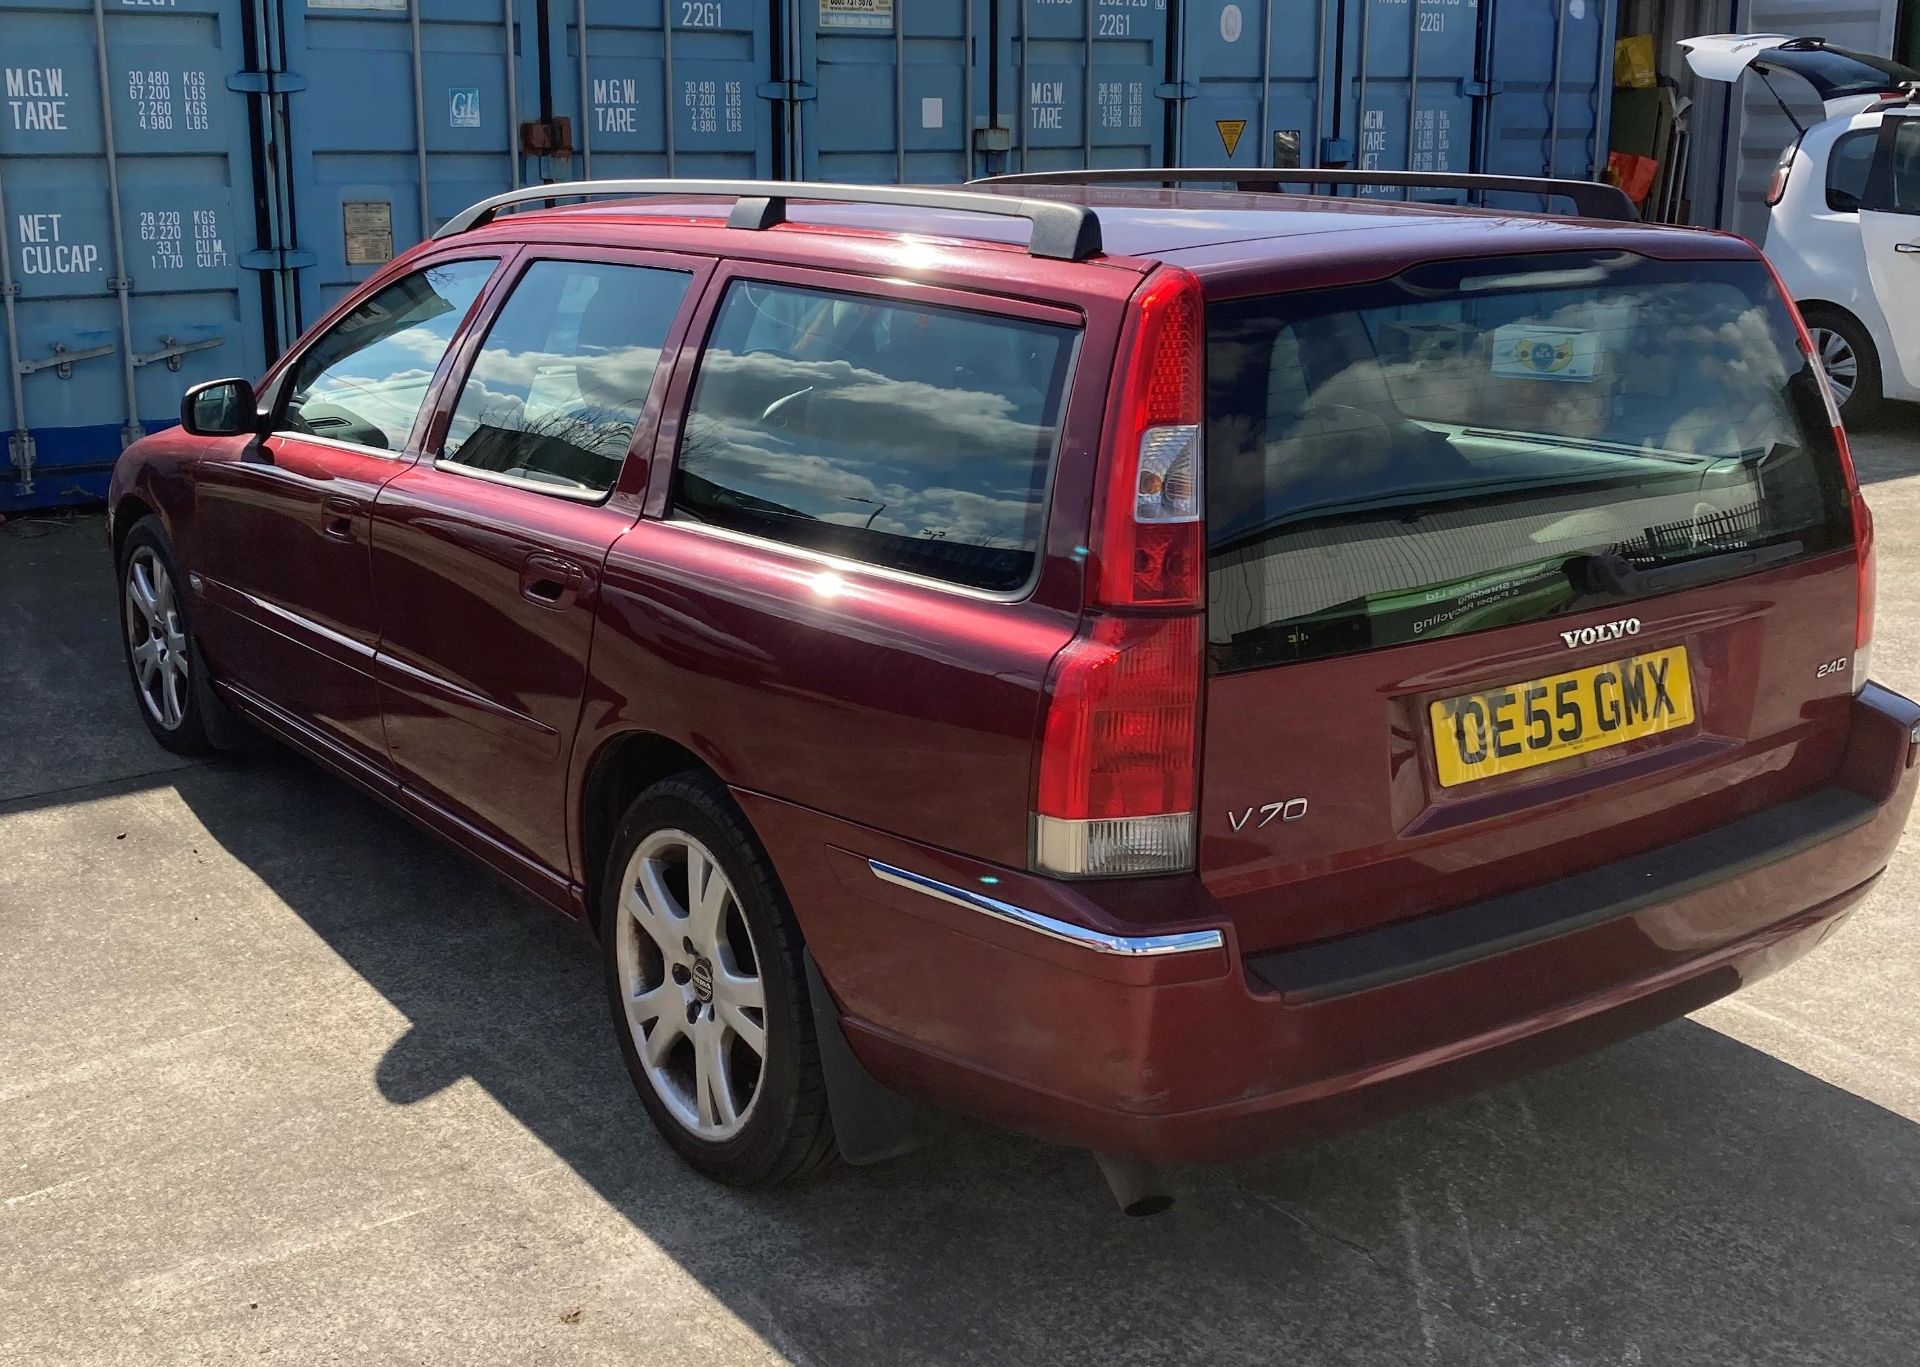 VOLVO V70 24D ESTATE AUTOMATIC - Diesel - Red - Cream leather interior. - Image 4 of 11